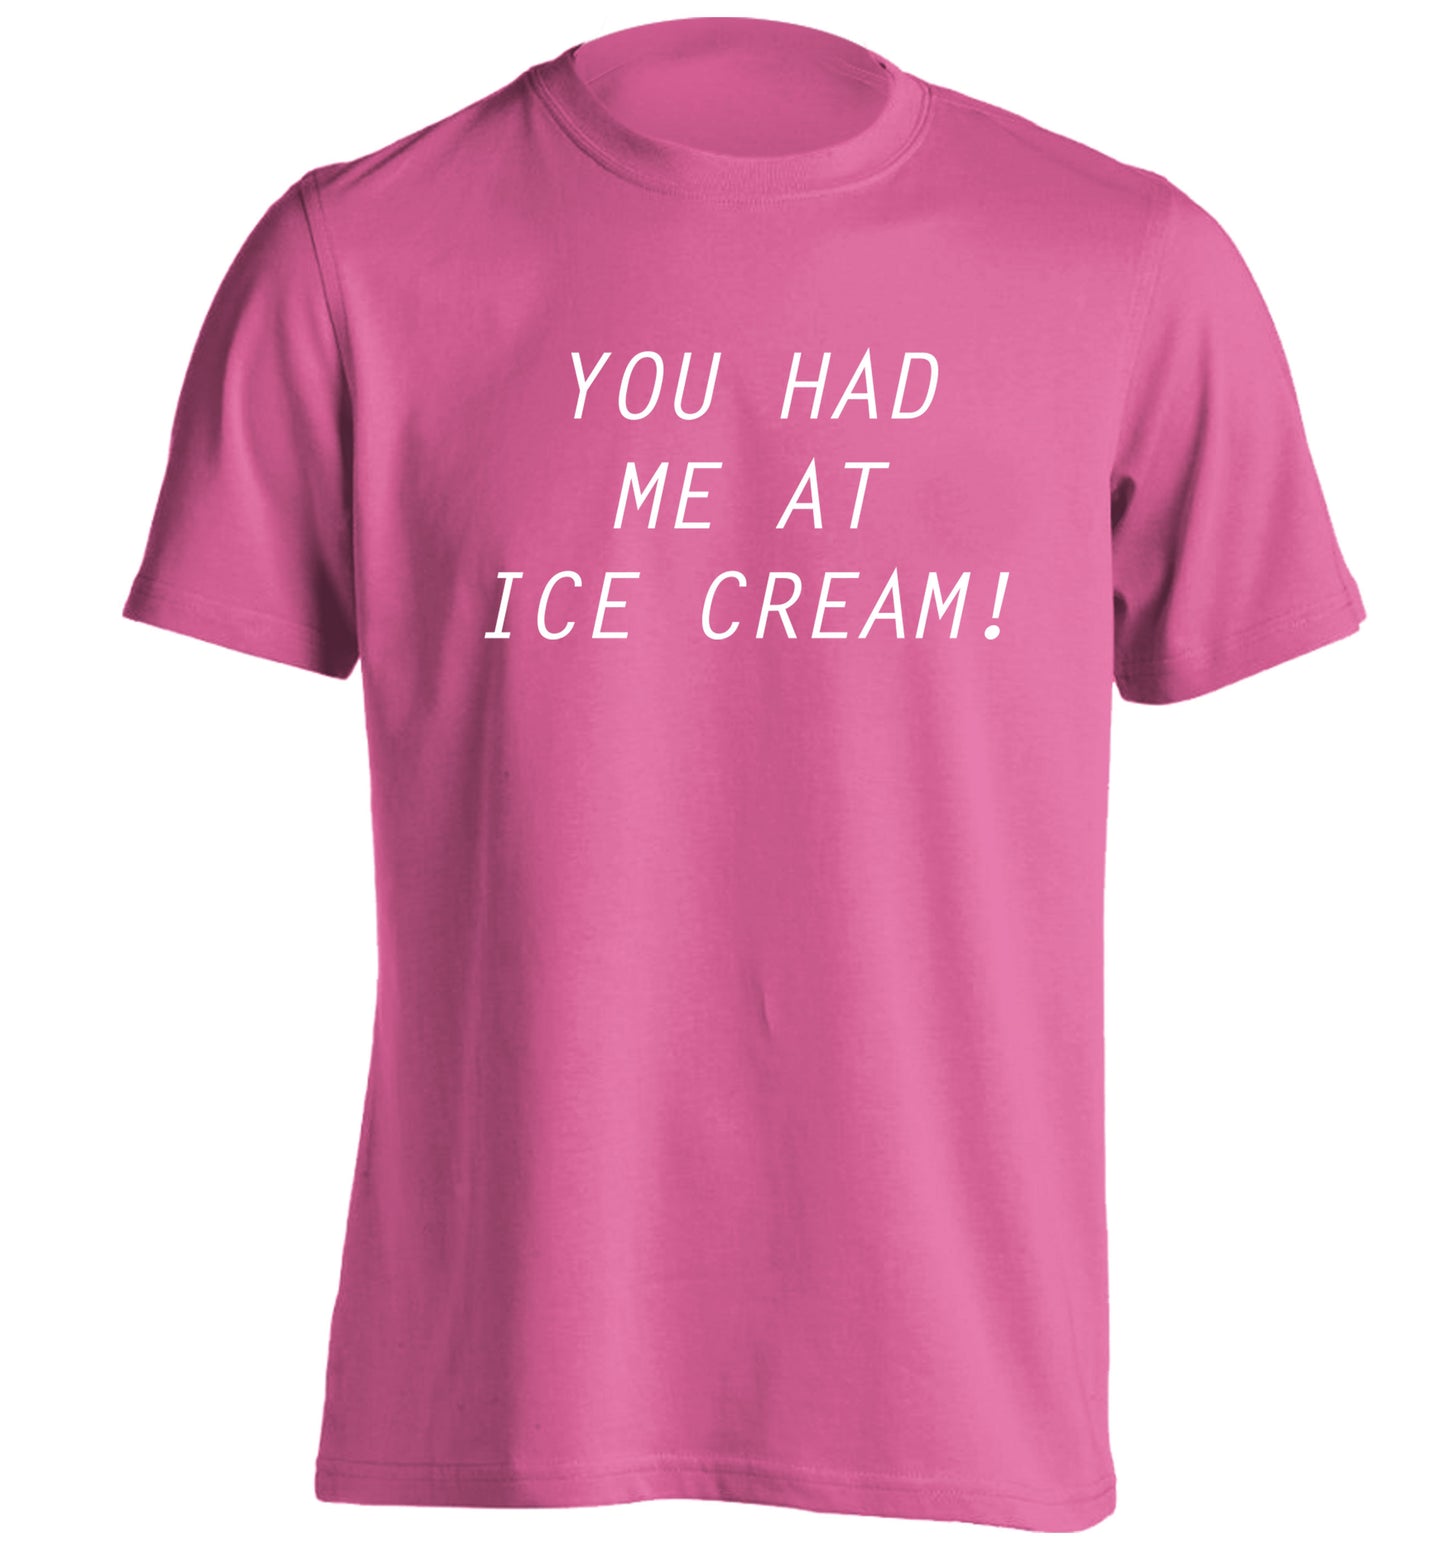 You had me at ice cream adults unisex pink Tshirt 2XL